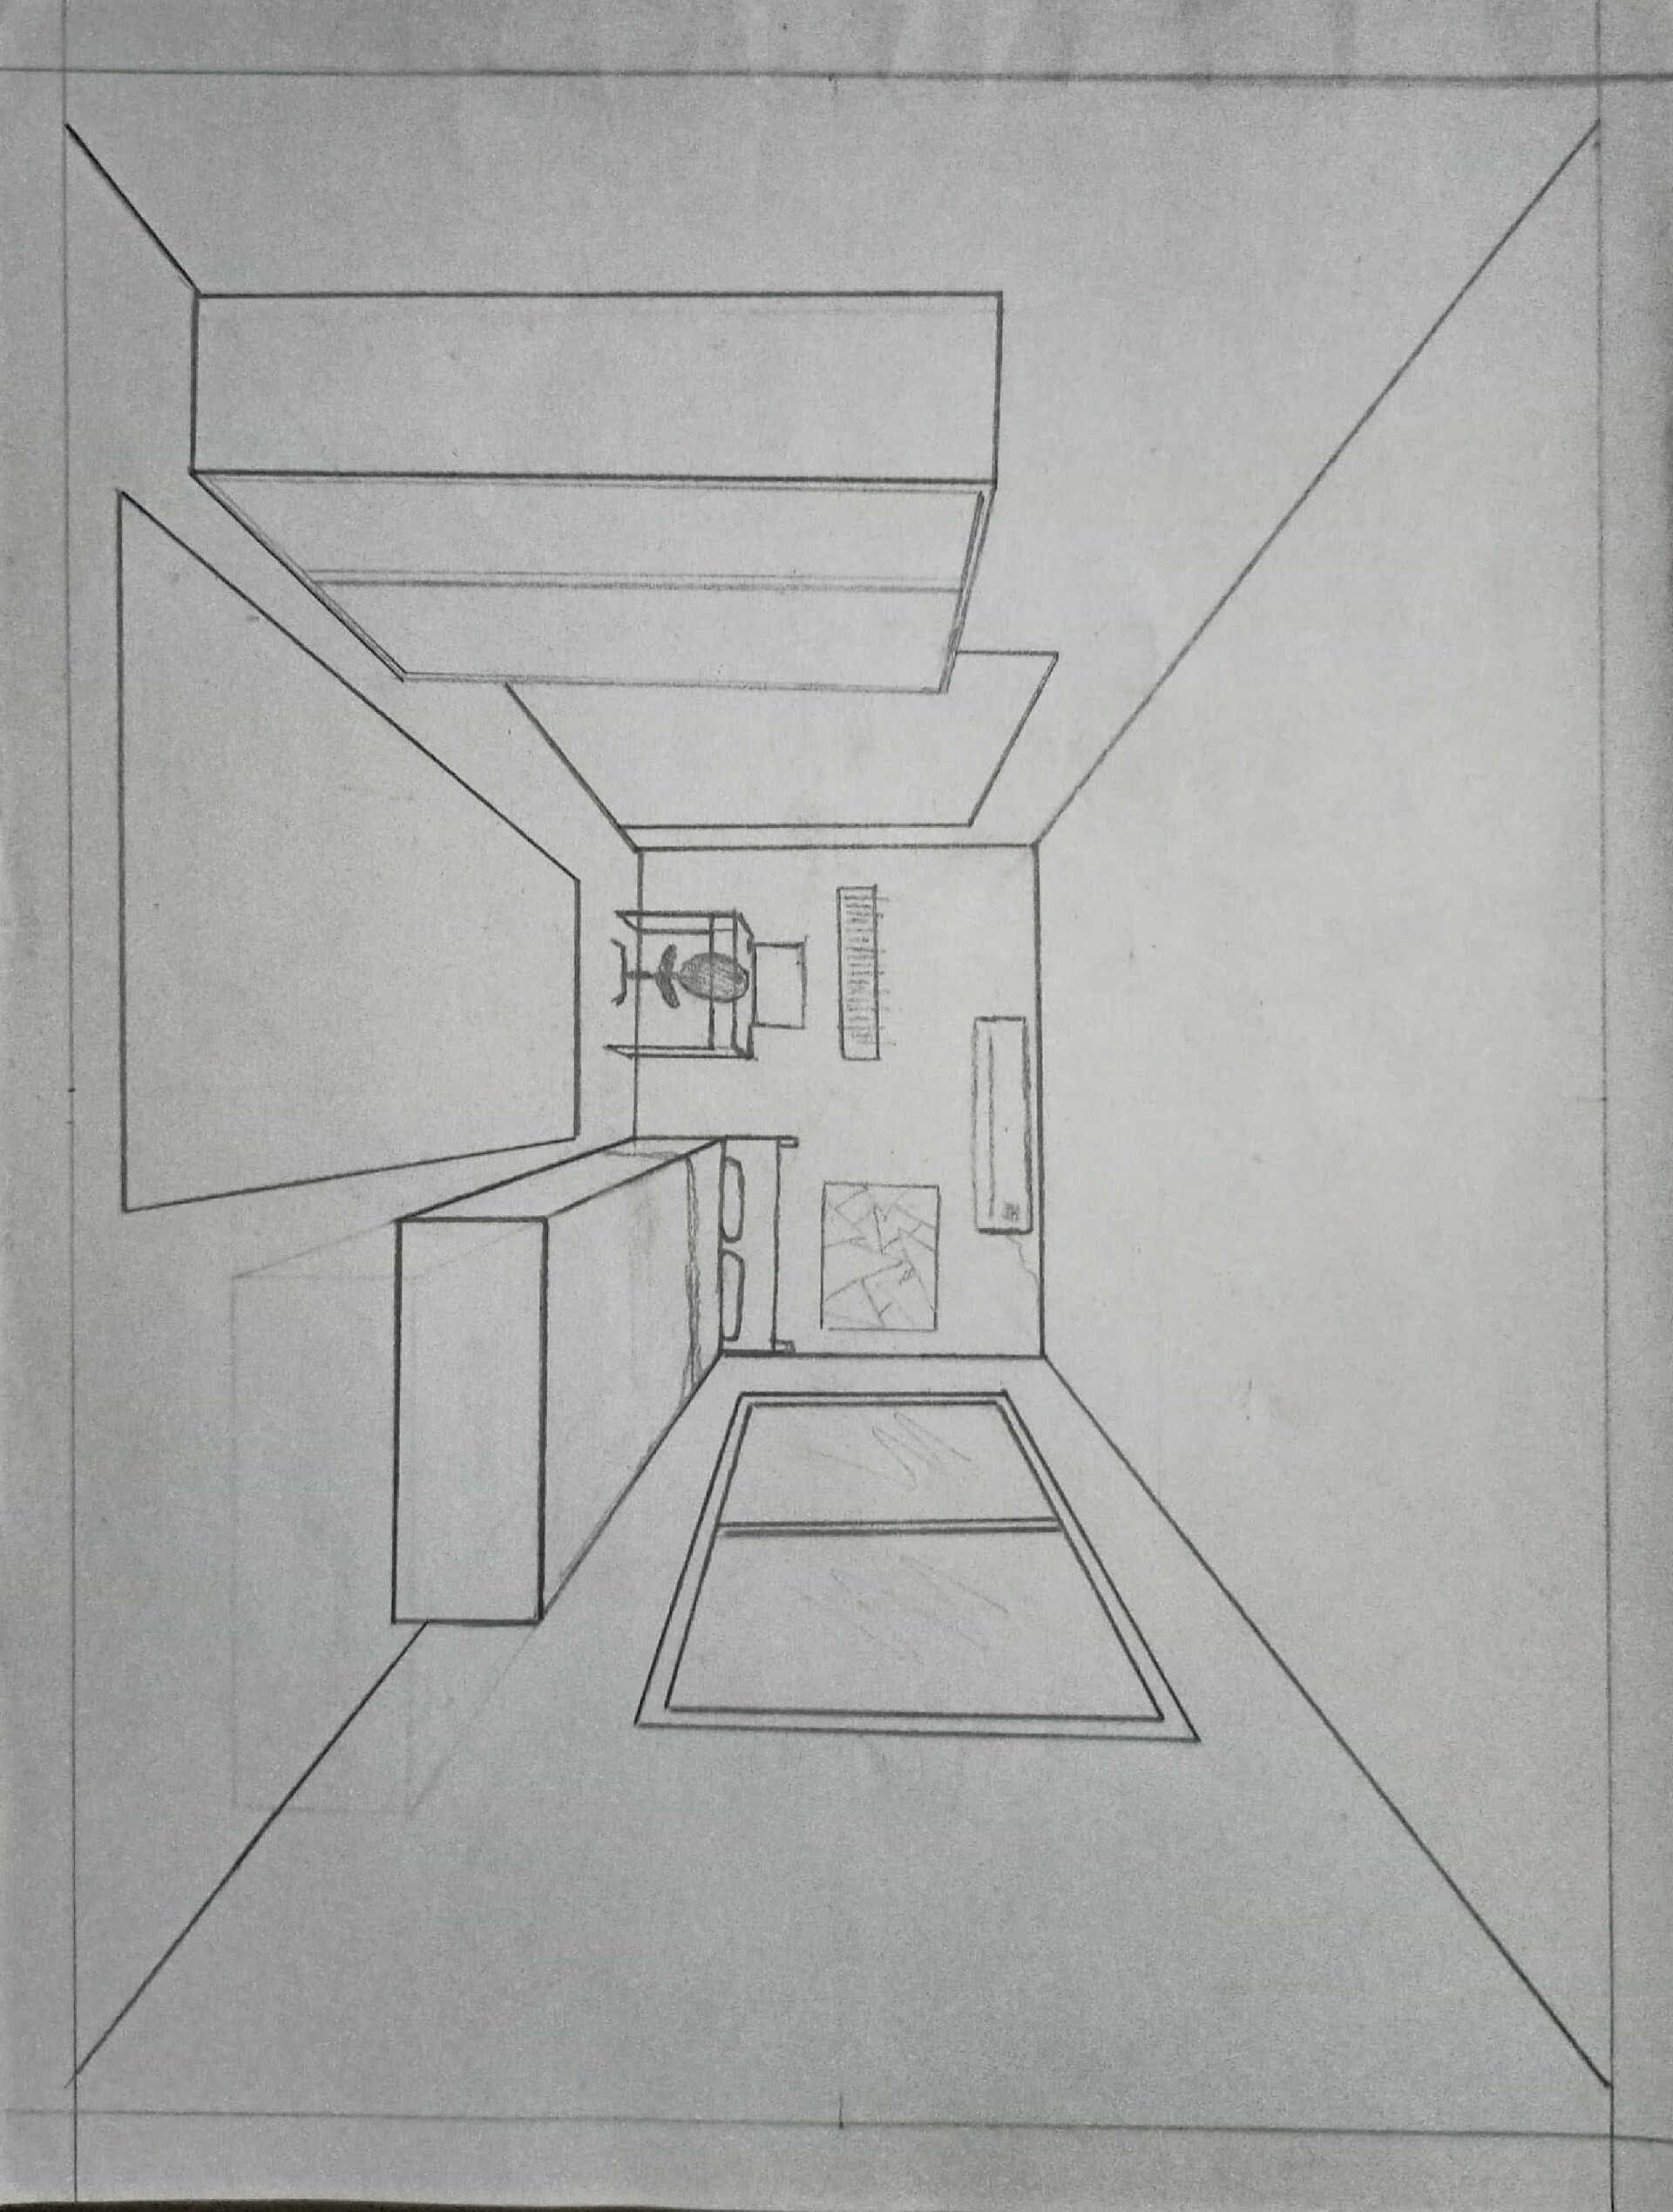 How to Draw a Room Using One Point Perspective : 11 Steps - Instructables